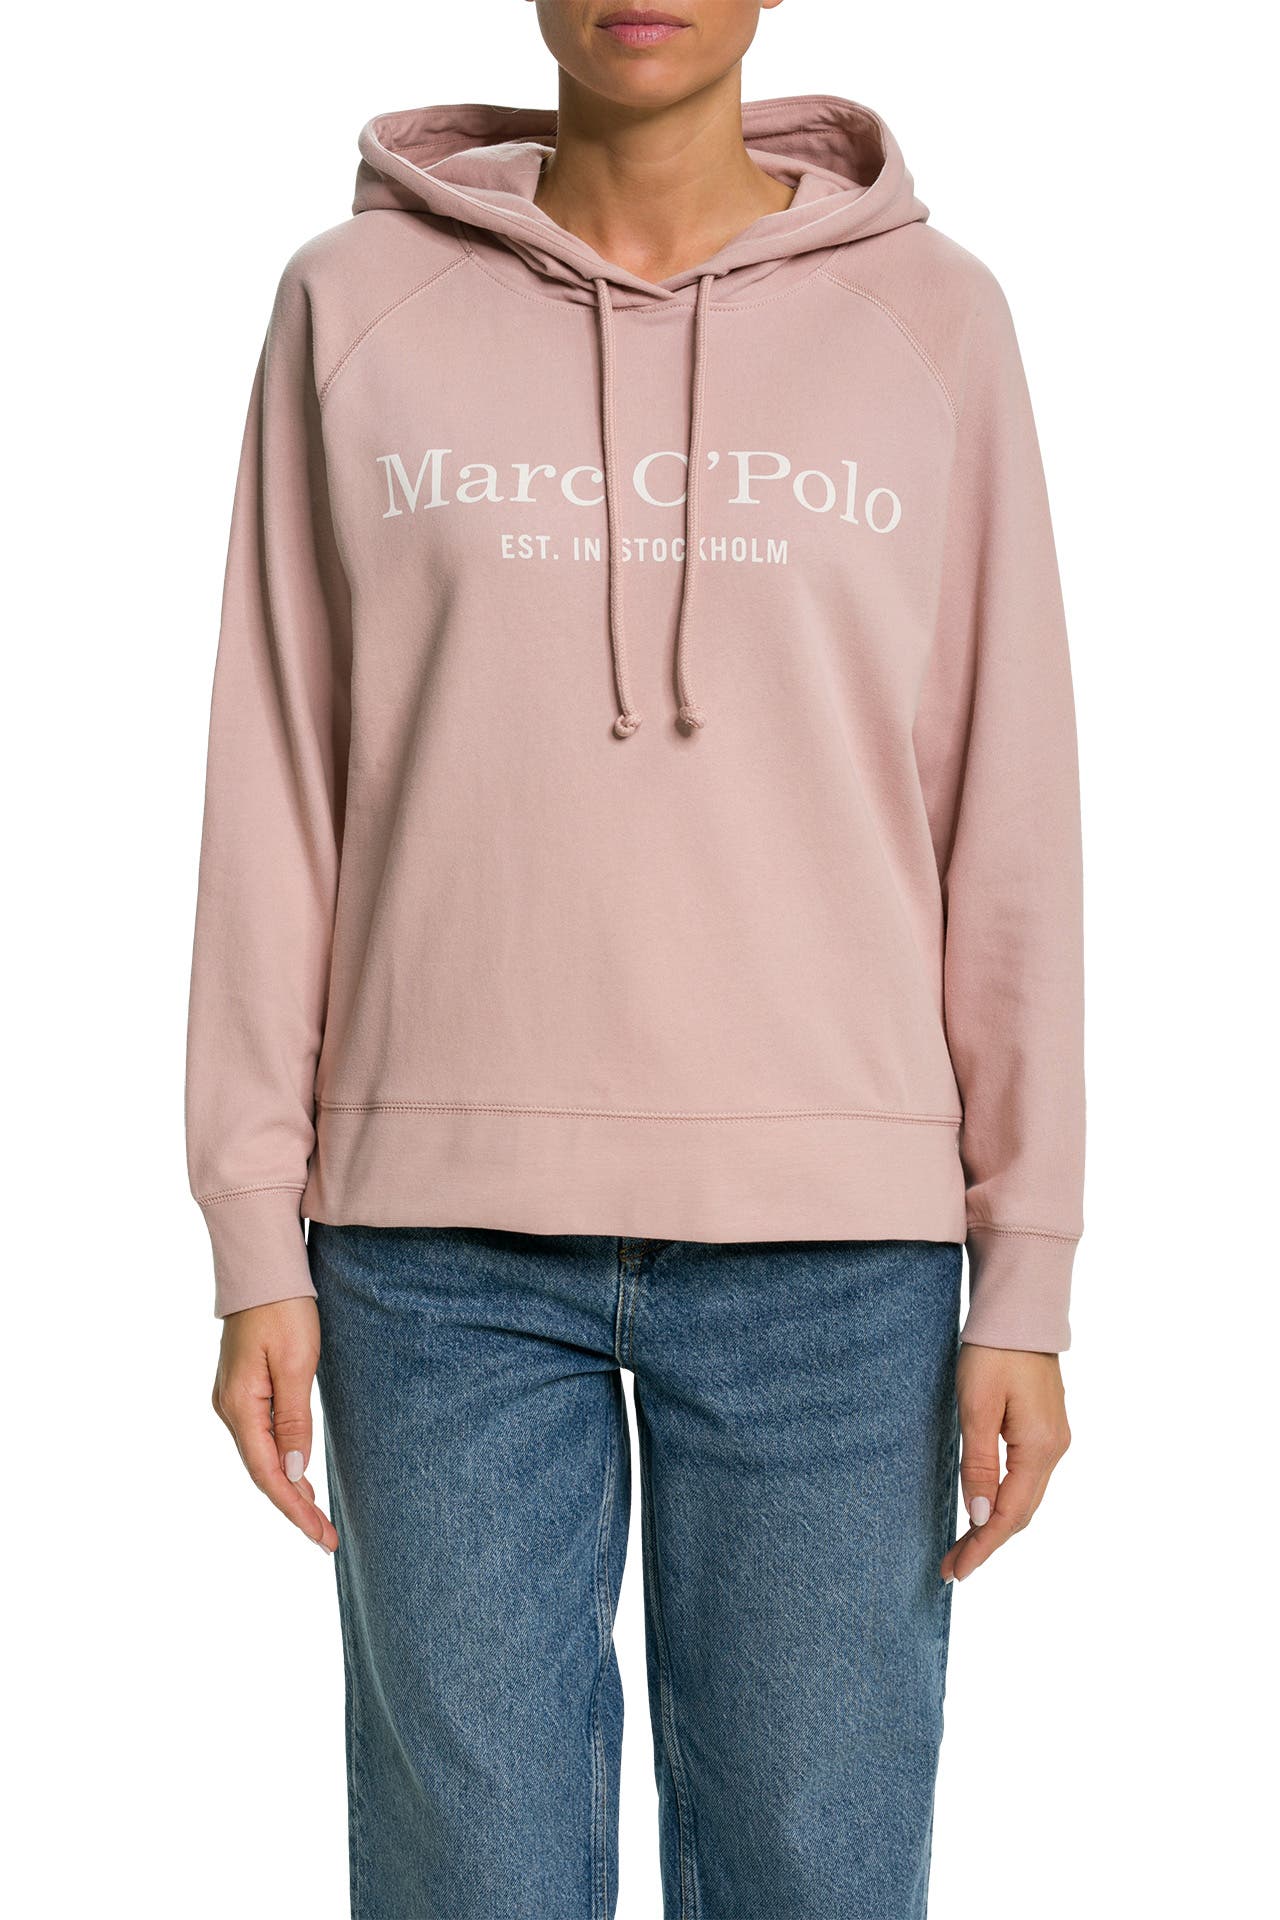 Marc O'Polo OUTLET in Germany 30-70%* off in Sale | Outletcity Metzingen